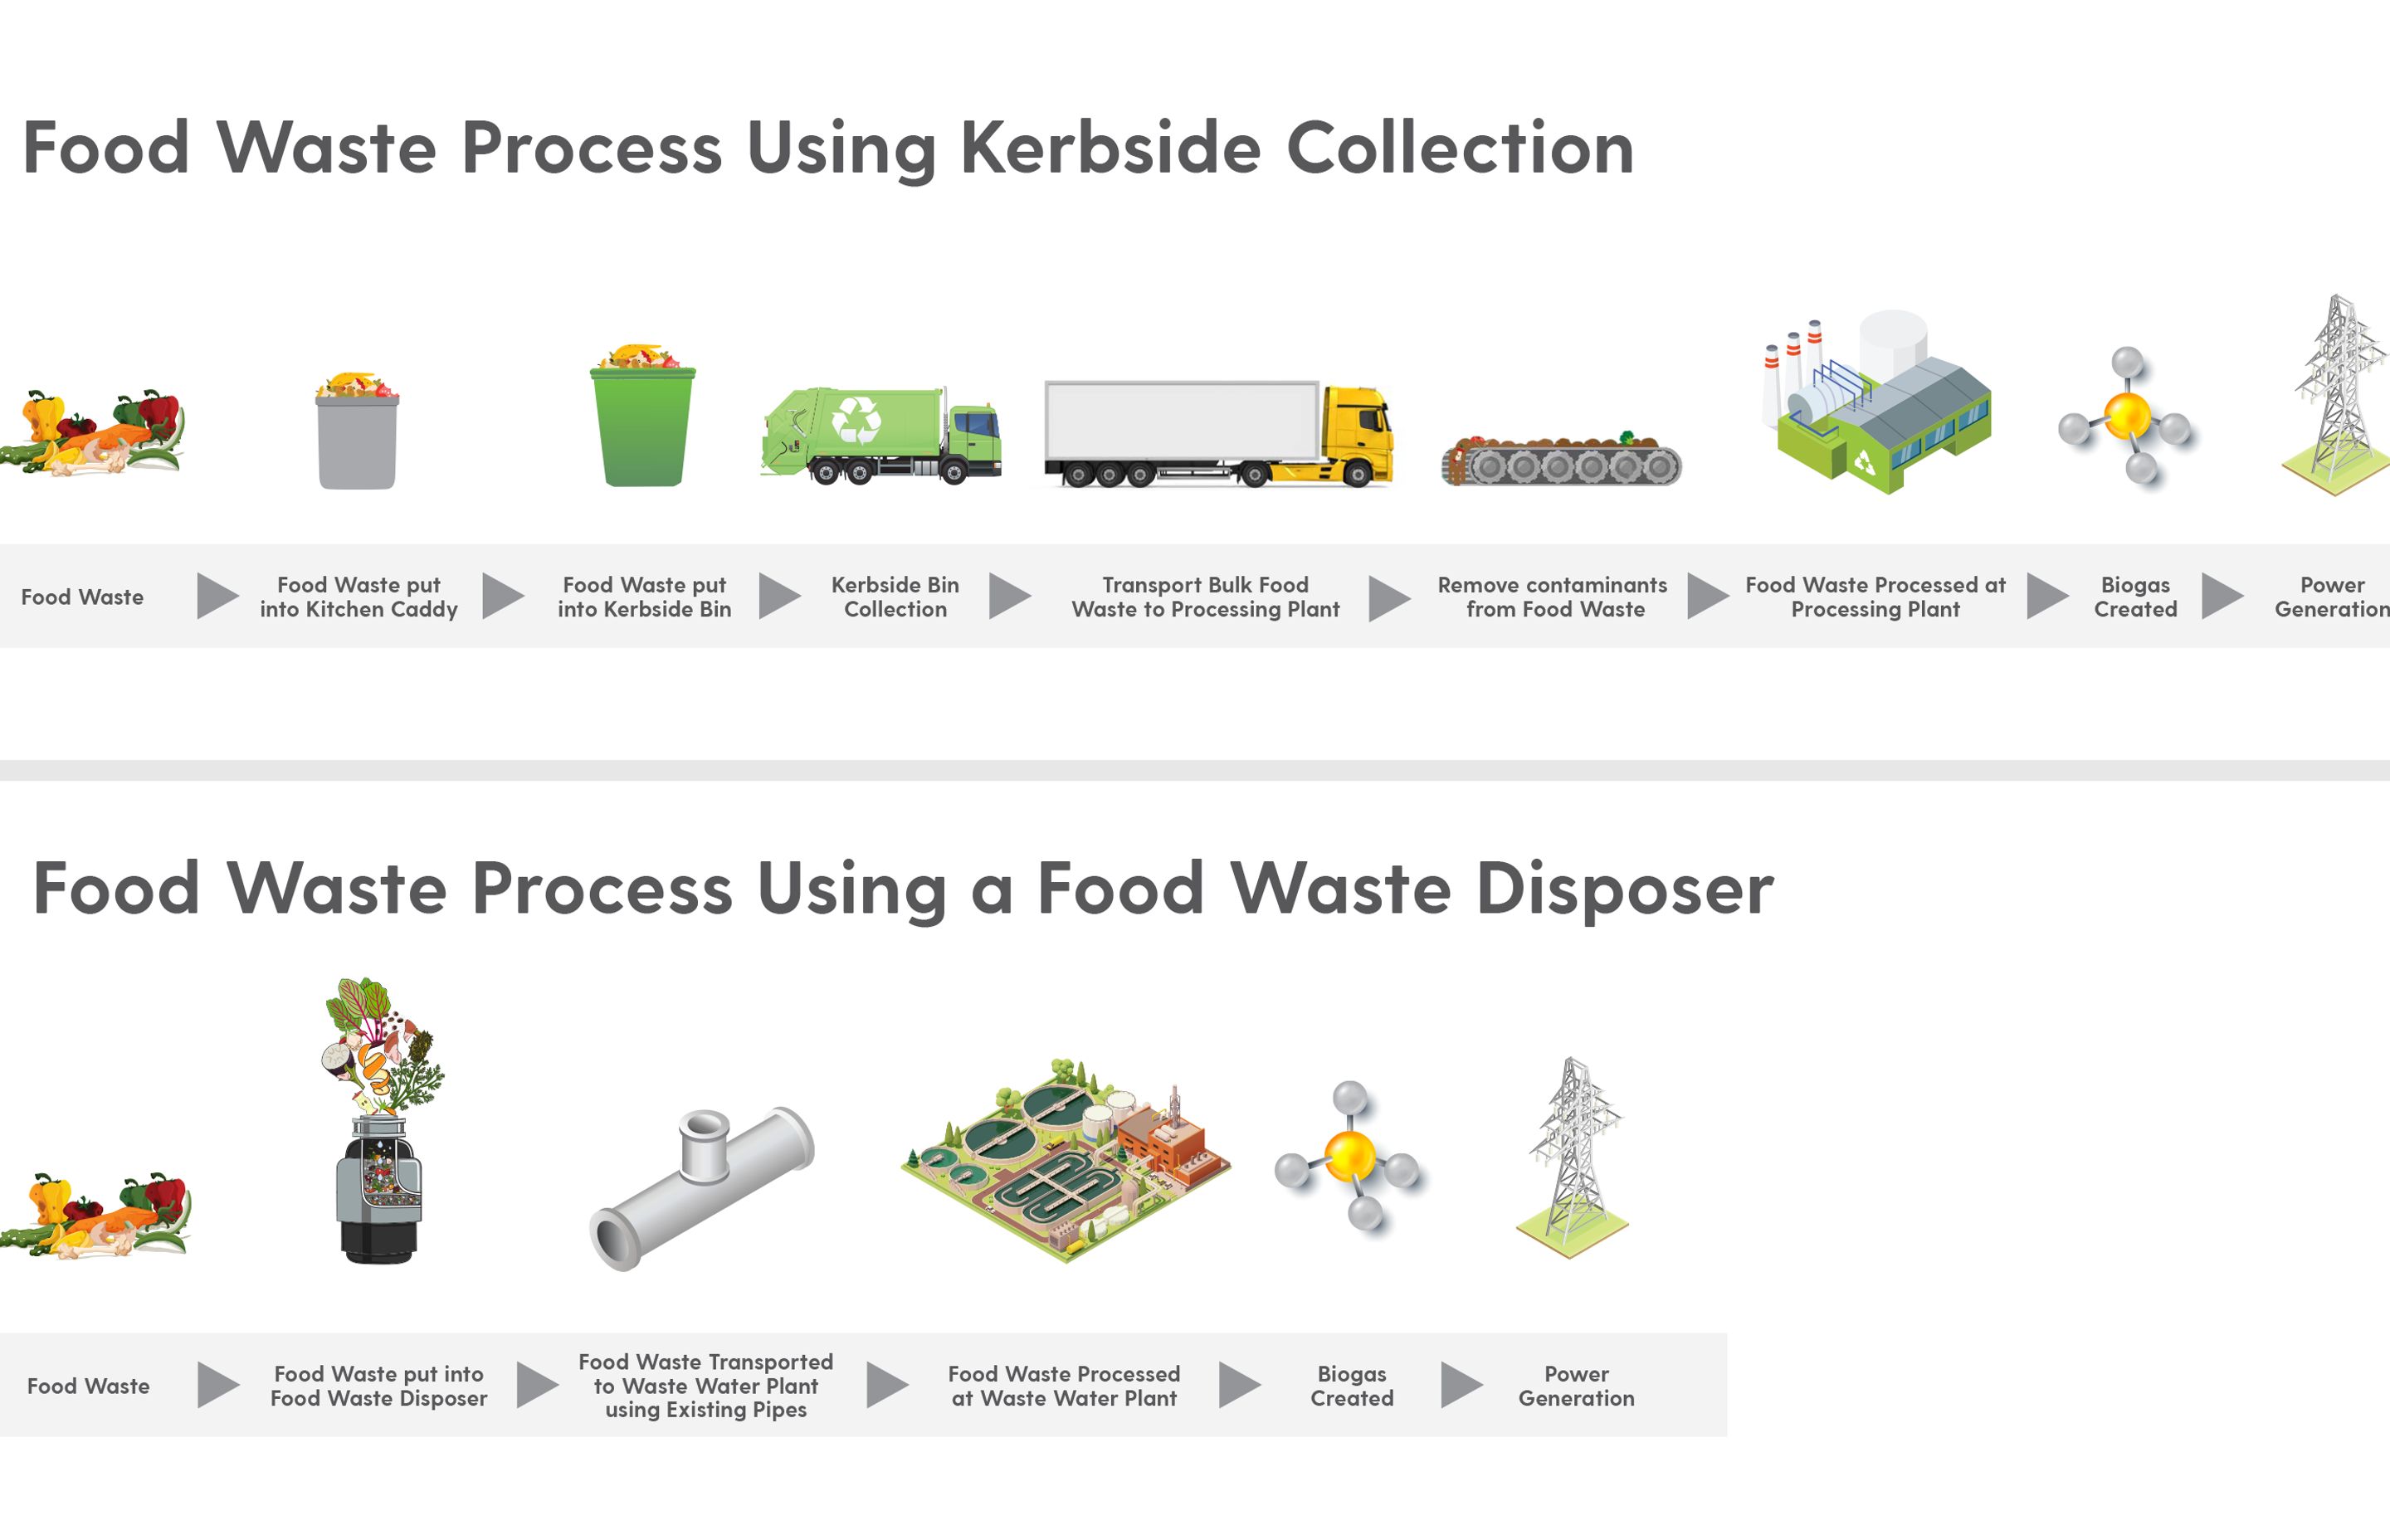 The food waste process when using an InSinkErator vs kerbside collection.